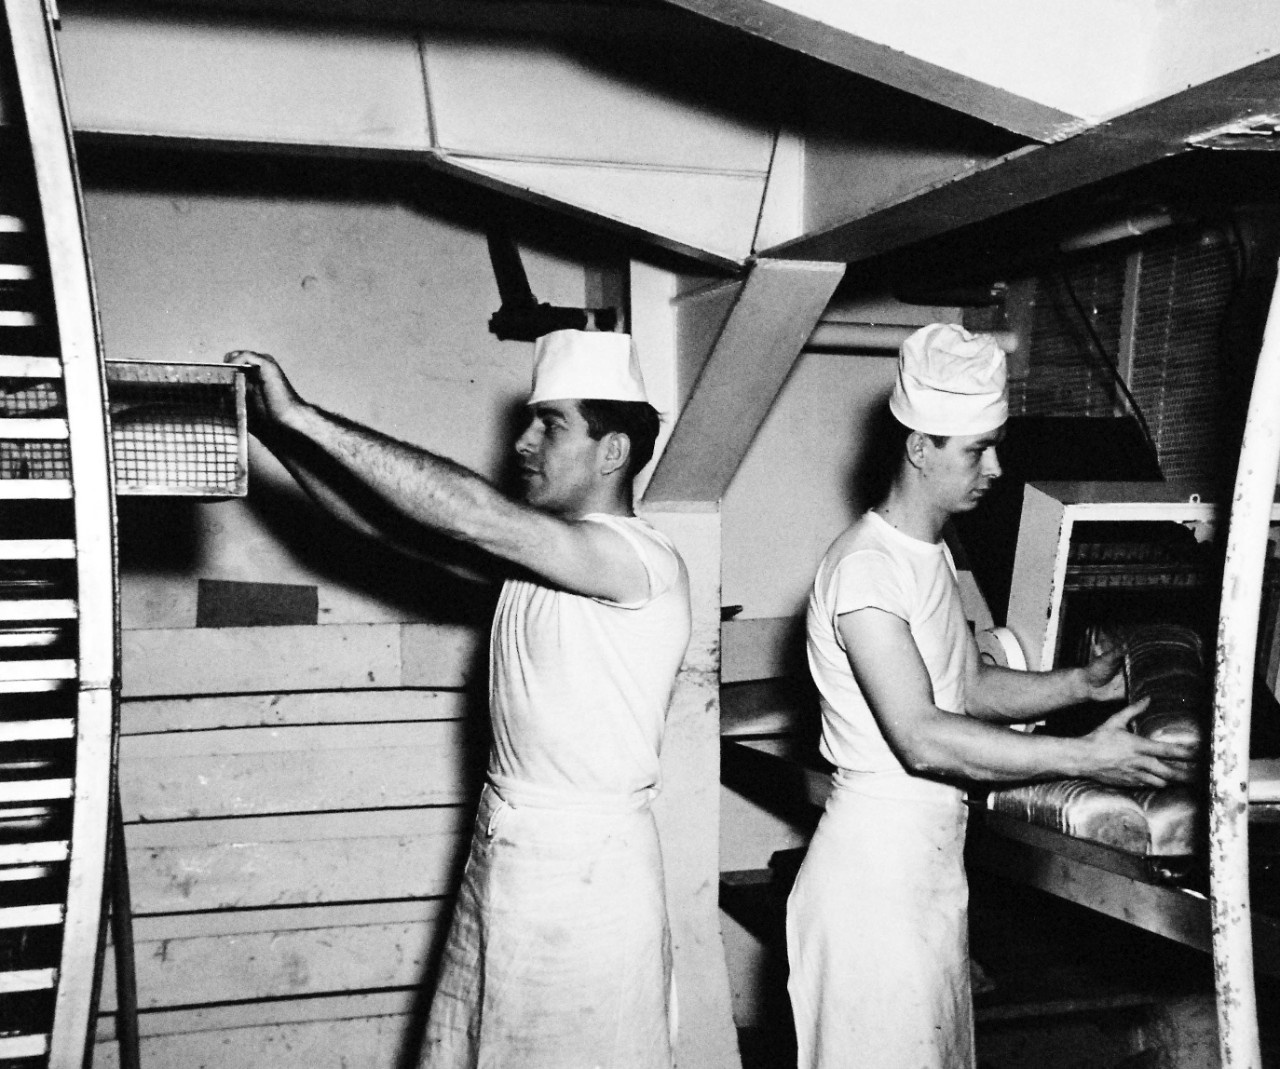 80-G-706996:   USS Leyte (CV-32), 1949.   Sailors working with the bread machine in the bake shop, released March 11, 1949. Official  U.S. Navy Photograph, now in the collections of the National Archives.  (2016/06/14).  